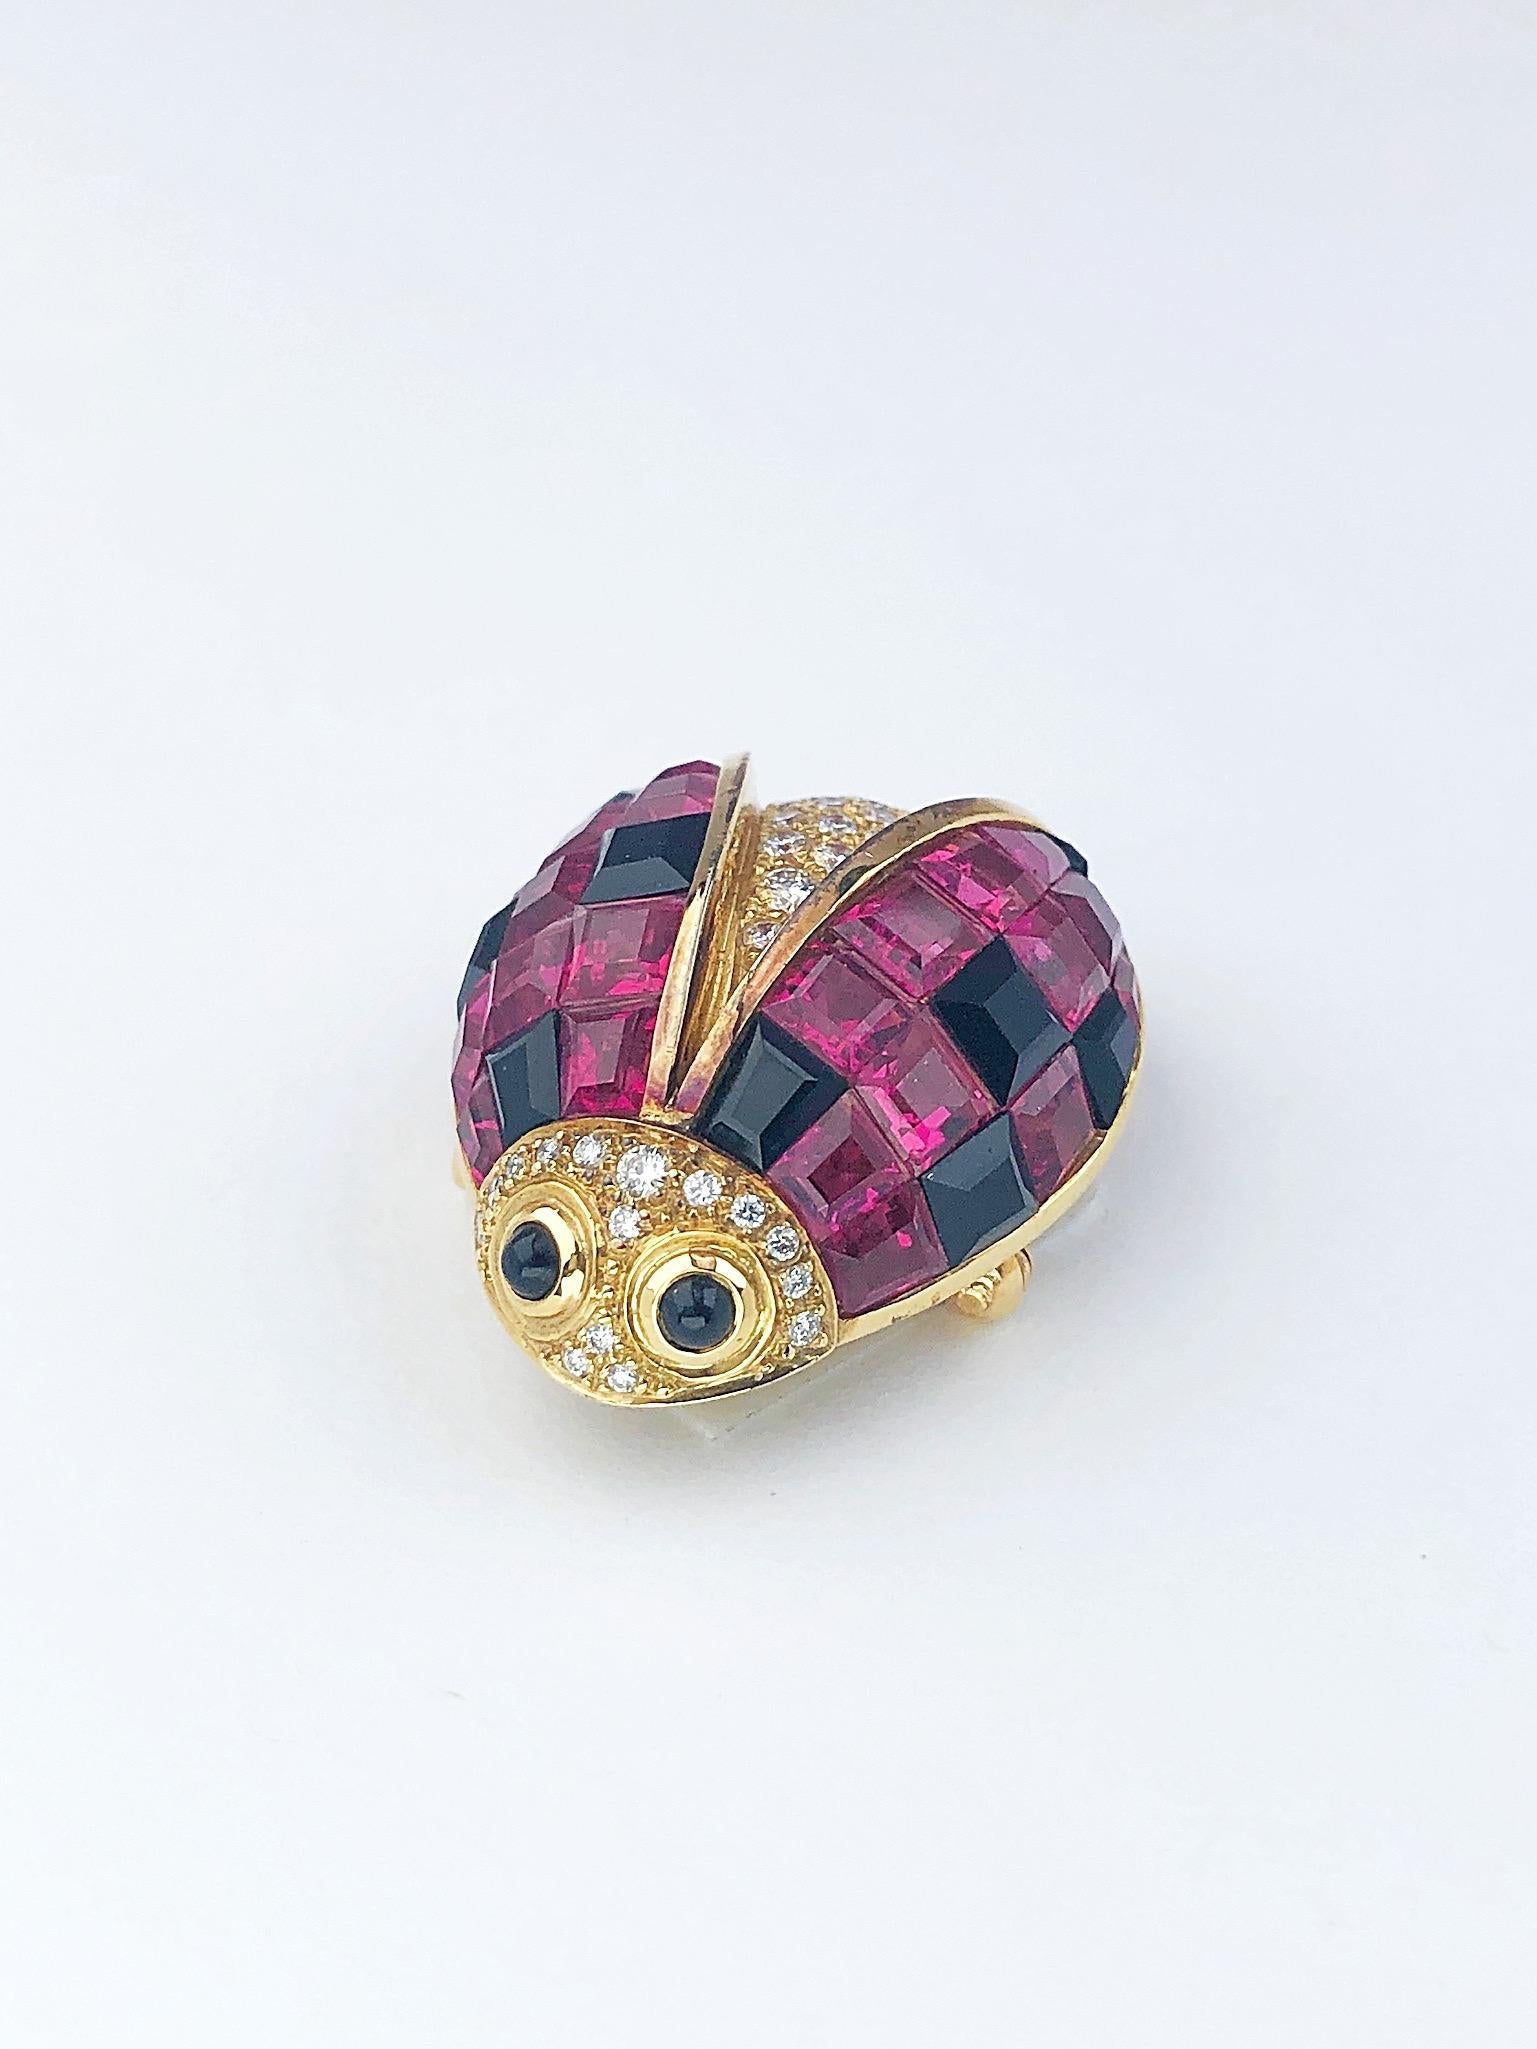 Started in the 1940's Sabbadini of Italy is known throughout the world for their artisinal excellence and creative design.
Their creativity shines in this 18 karat yellow gold lady bug brooch. The wings art artfully set with square cut pink